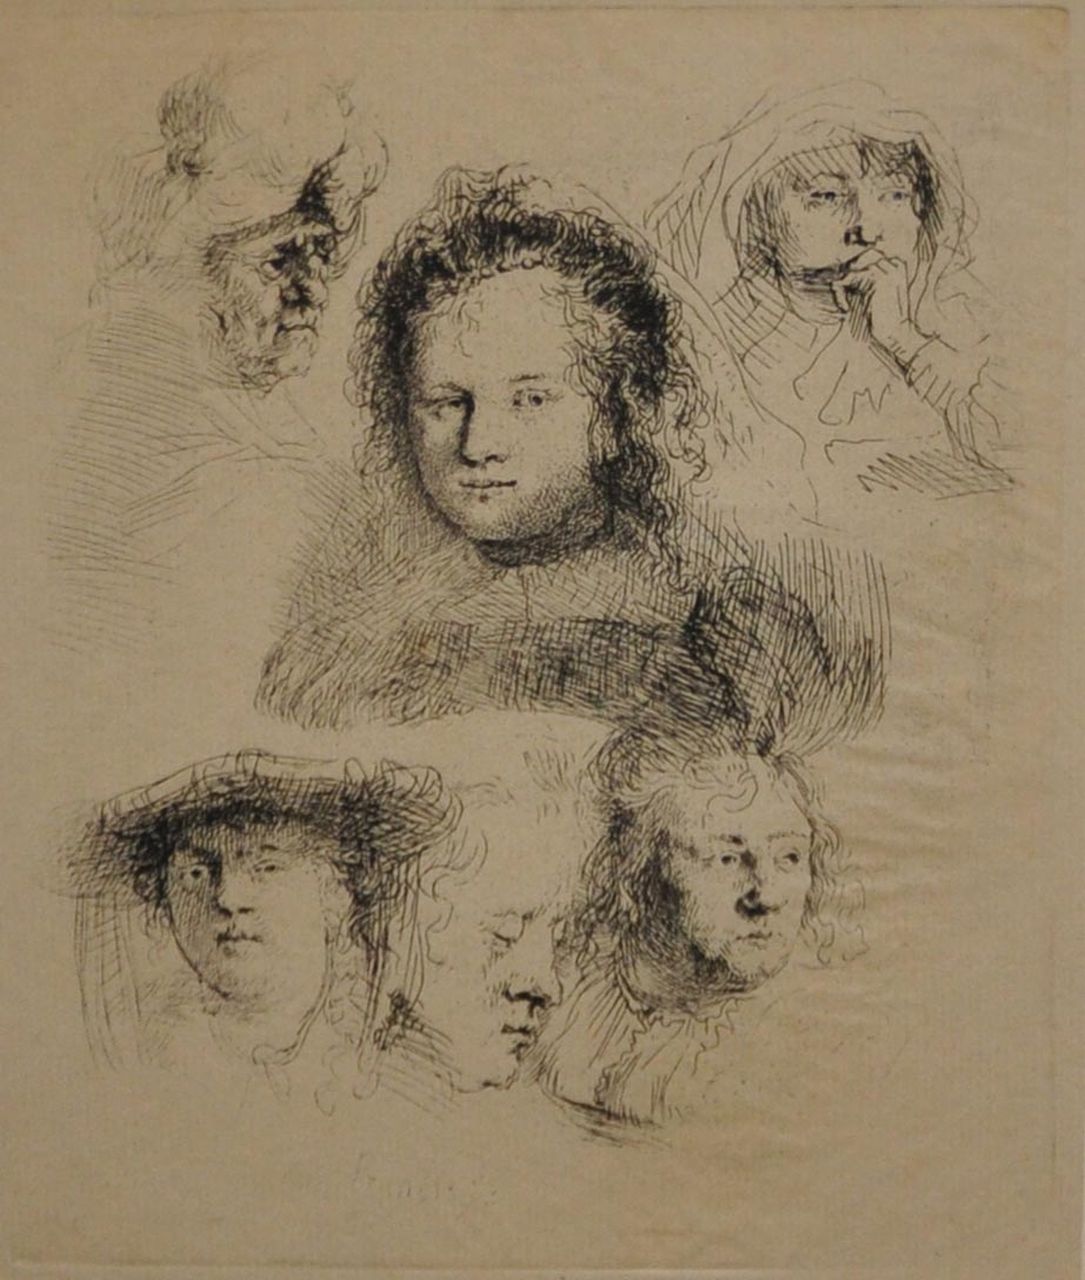 Rembrandt (Rembrandt Harmensz. van Rijn)   | Rembrandt (Rembrandt Harmensz. van Rijn), Studies of the head of Saskia and others, etching 15.1 x 12.6 cm, signed l.l. in the plate and dated 1636 in the plate